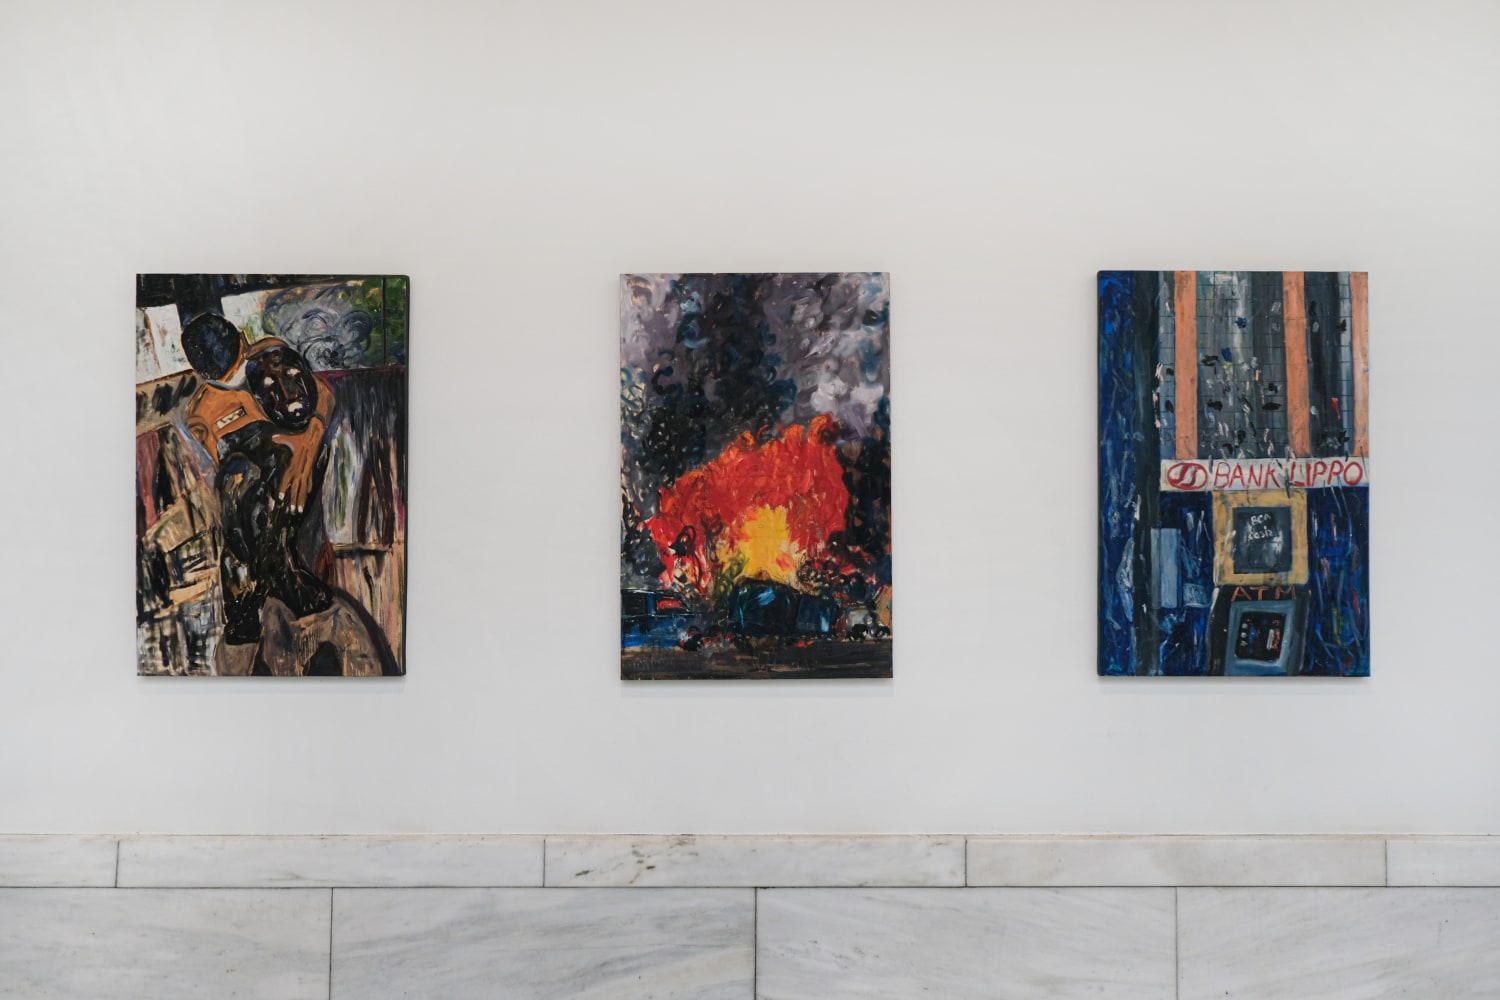 (From the left)&amp;nbsp;Installation view of Pacita Abad,&amp;nbsp;Burnt Man,&amp;nbsp;1998,&amp;nbsp;Glodok burning,&amp;nbsp;1998, and&amp;nbsp;Bank Lippo,&amp;nbsp;1998&amp;nbsp;at&amp;nbsp;Carnegie Museum of Art.&amp;nbsp;Image courtesy of Pacita Abad Art Estate and Tina Kim Gallery.